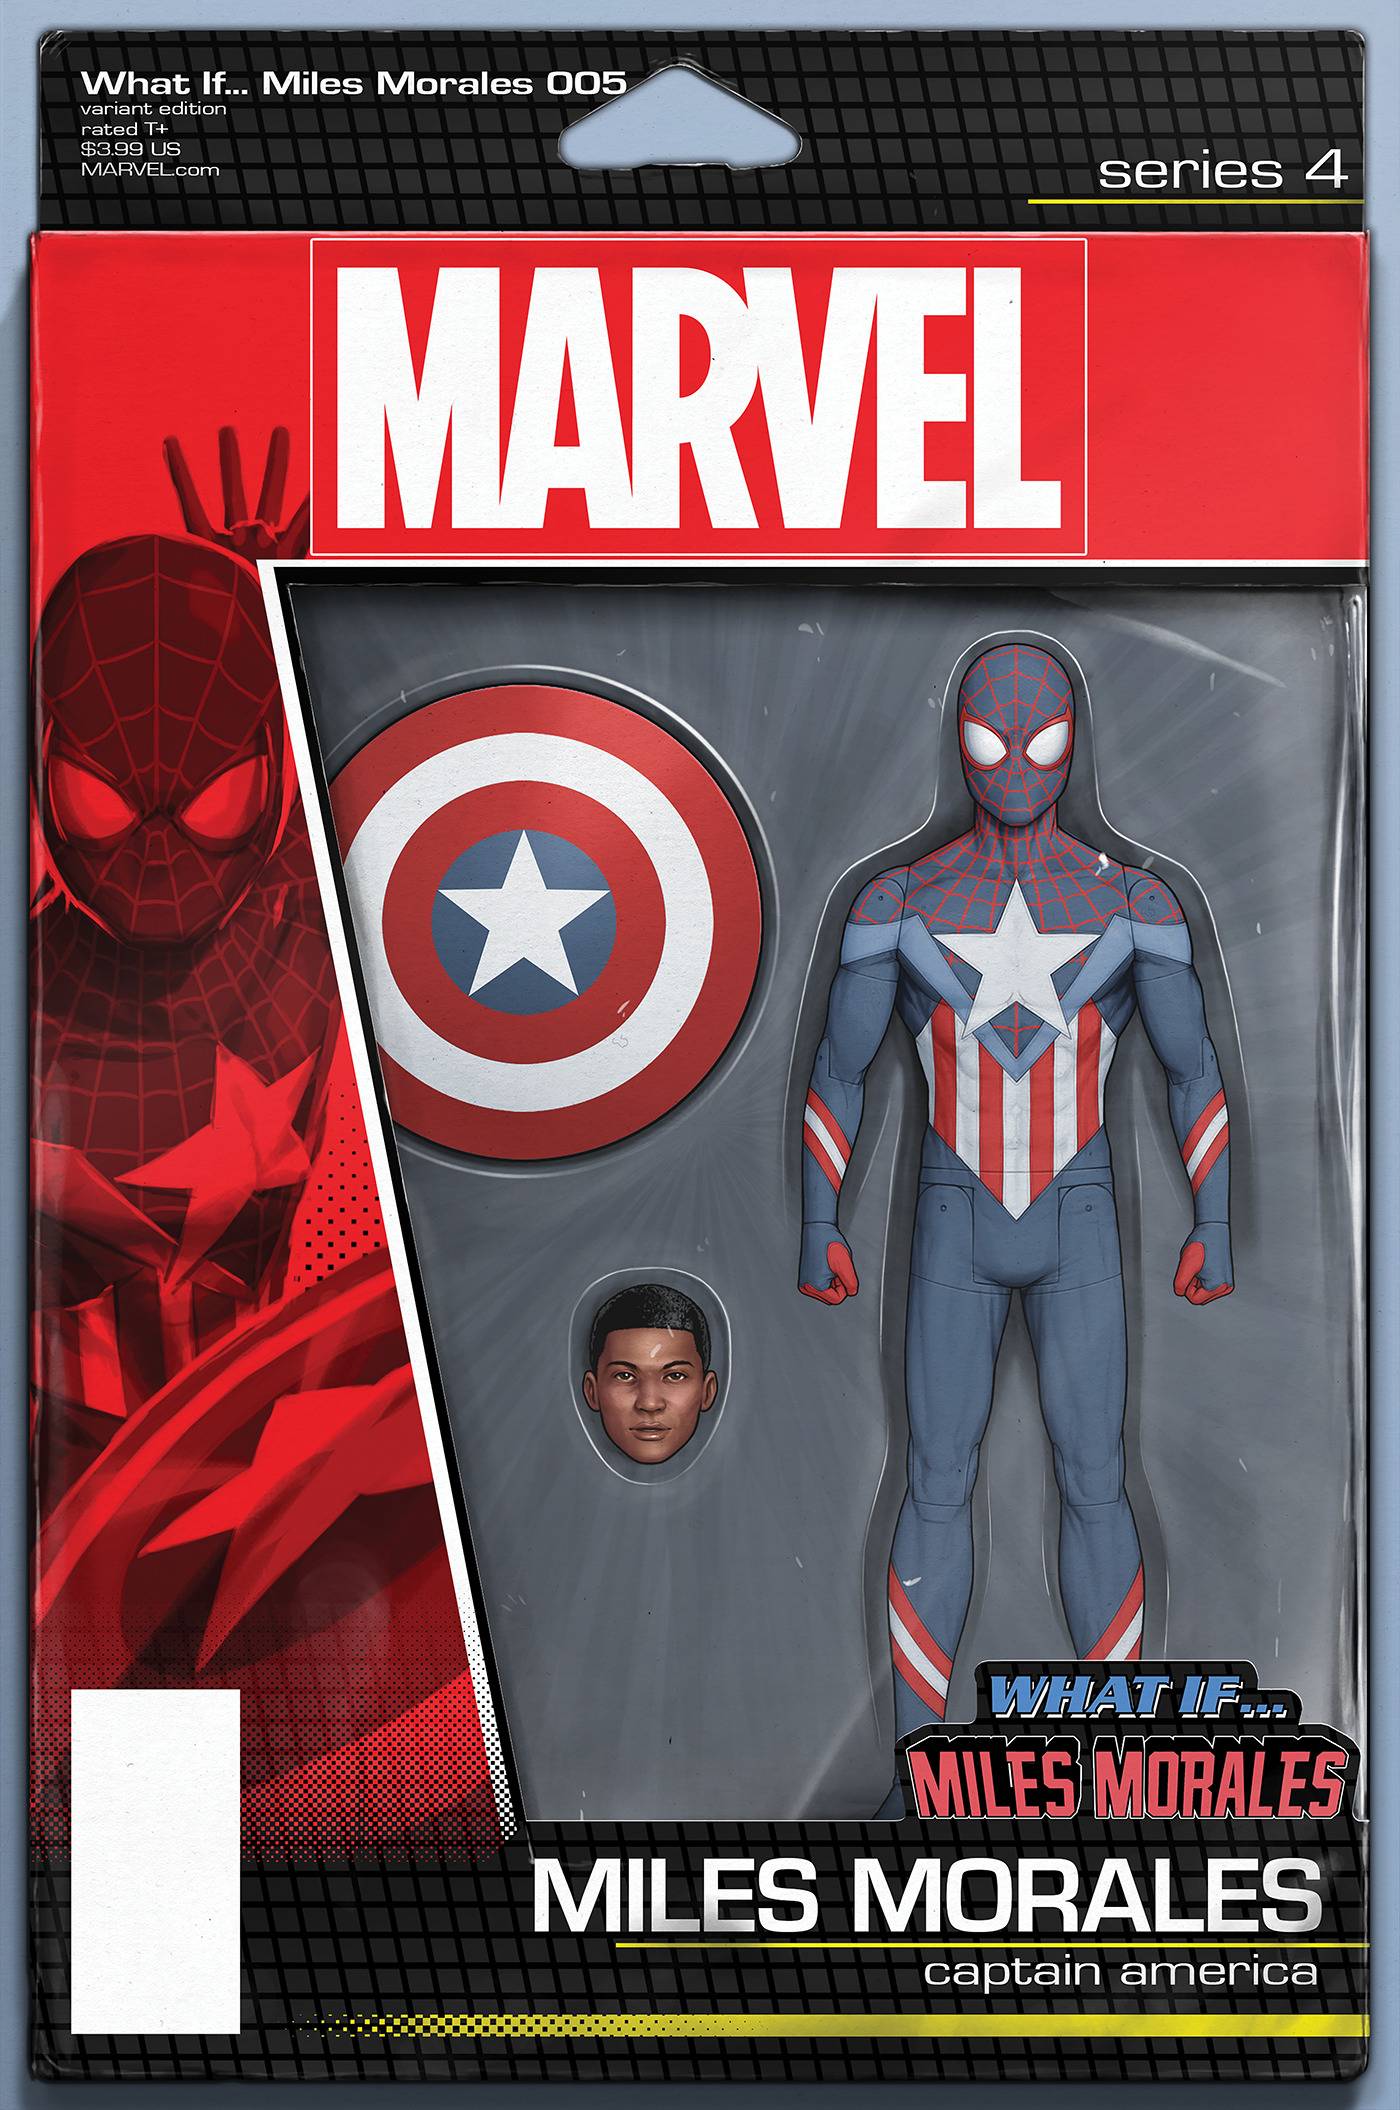 07/06/2022 WHAT IF MILES MORALES #5 (OF 5) CHRISTOPHER ACTION FIG VARIANT